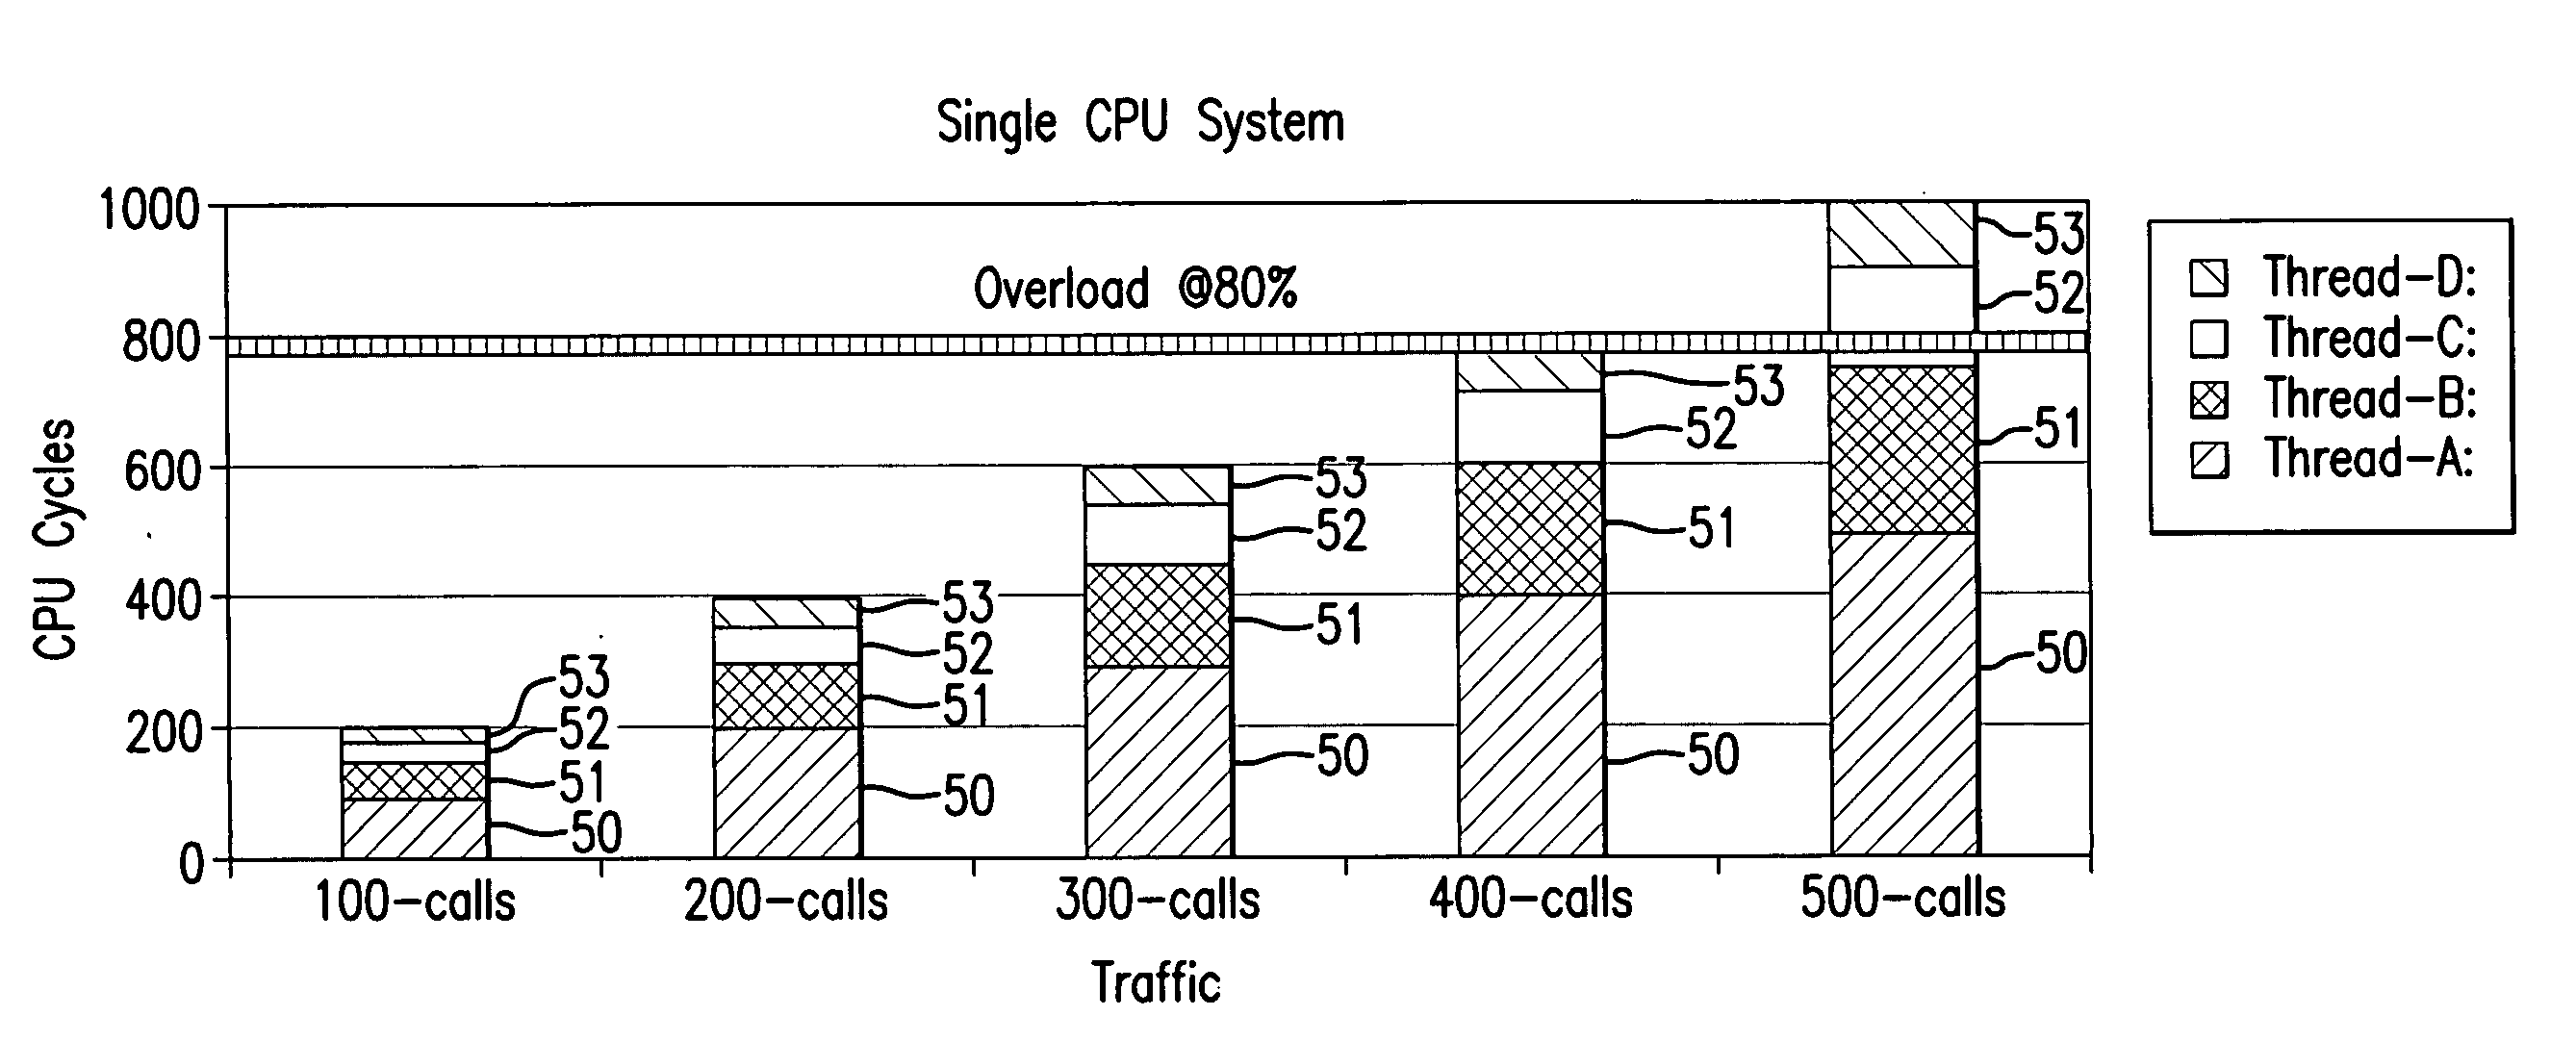 Overload detection on multi-CPU system